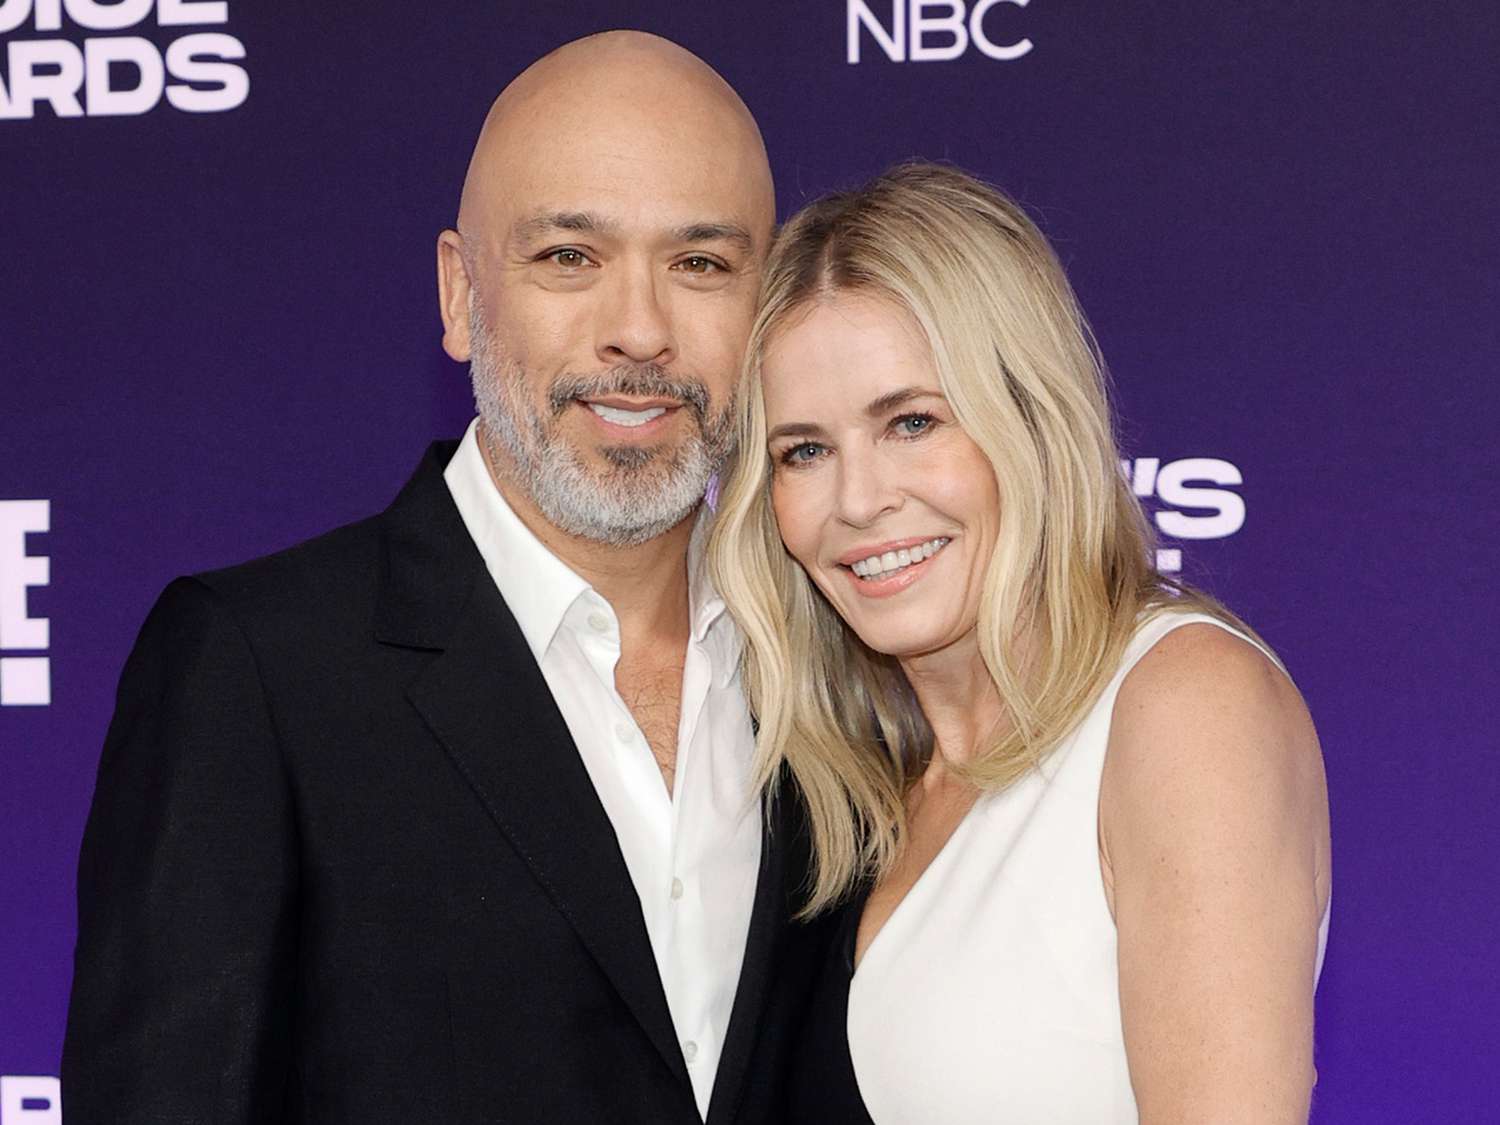 Jo Koy wearing a blck suit and Chelsea Handler wearing a black and white dress